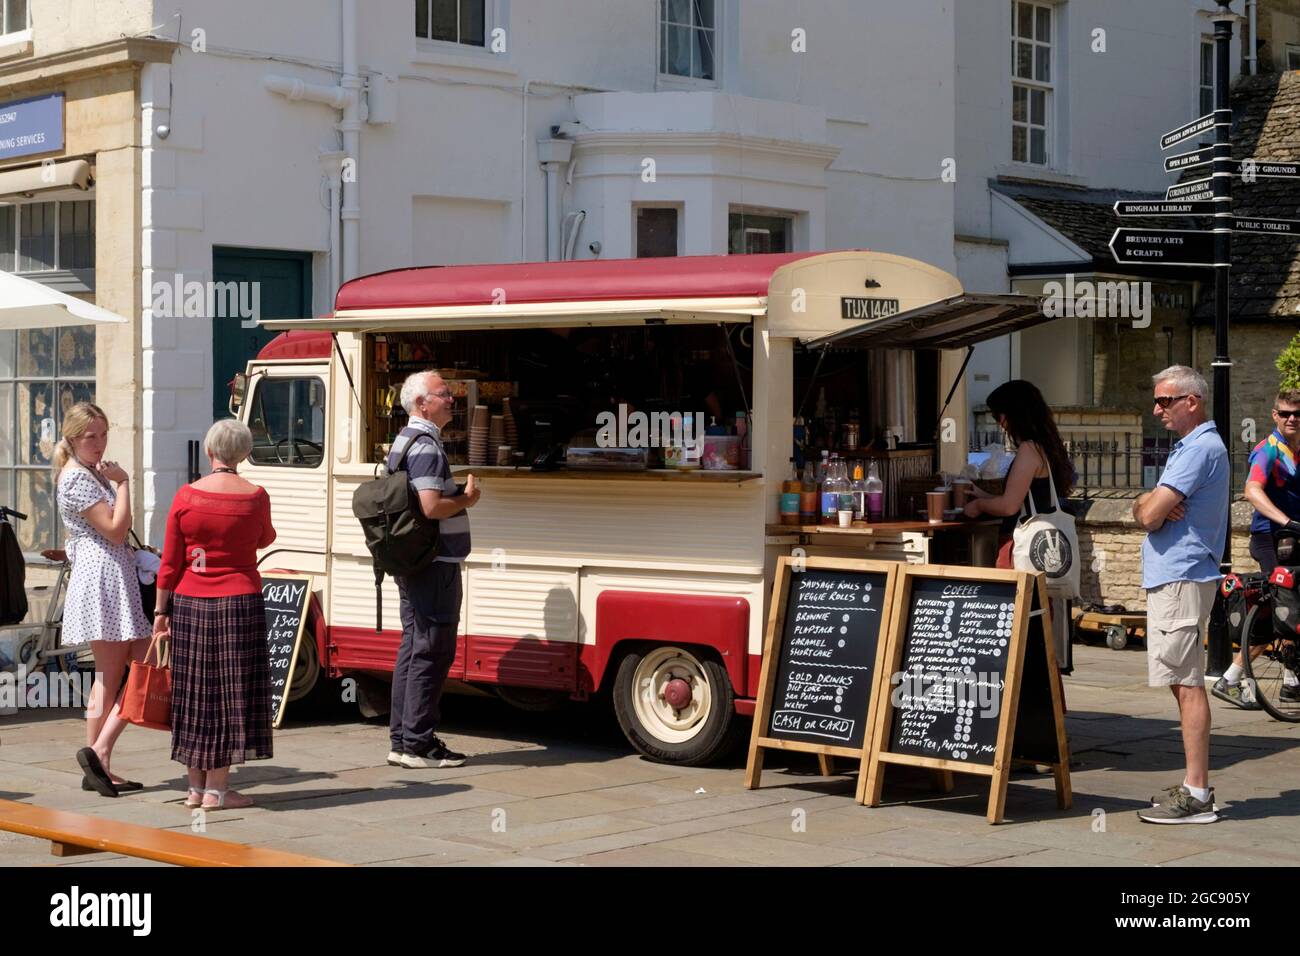 Around Cirencester, a traditional Gloucester market town in the Cotswolds. coffee and Tea Van. Stock Photo